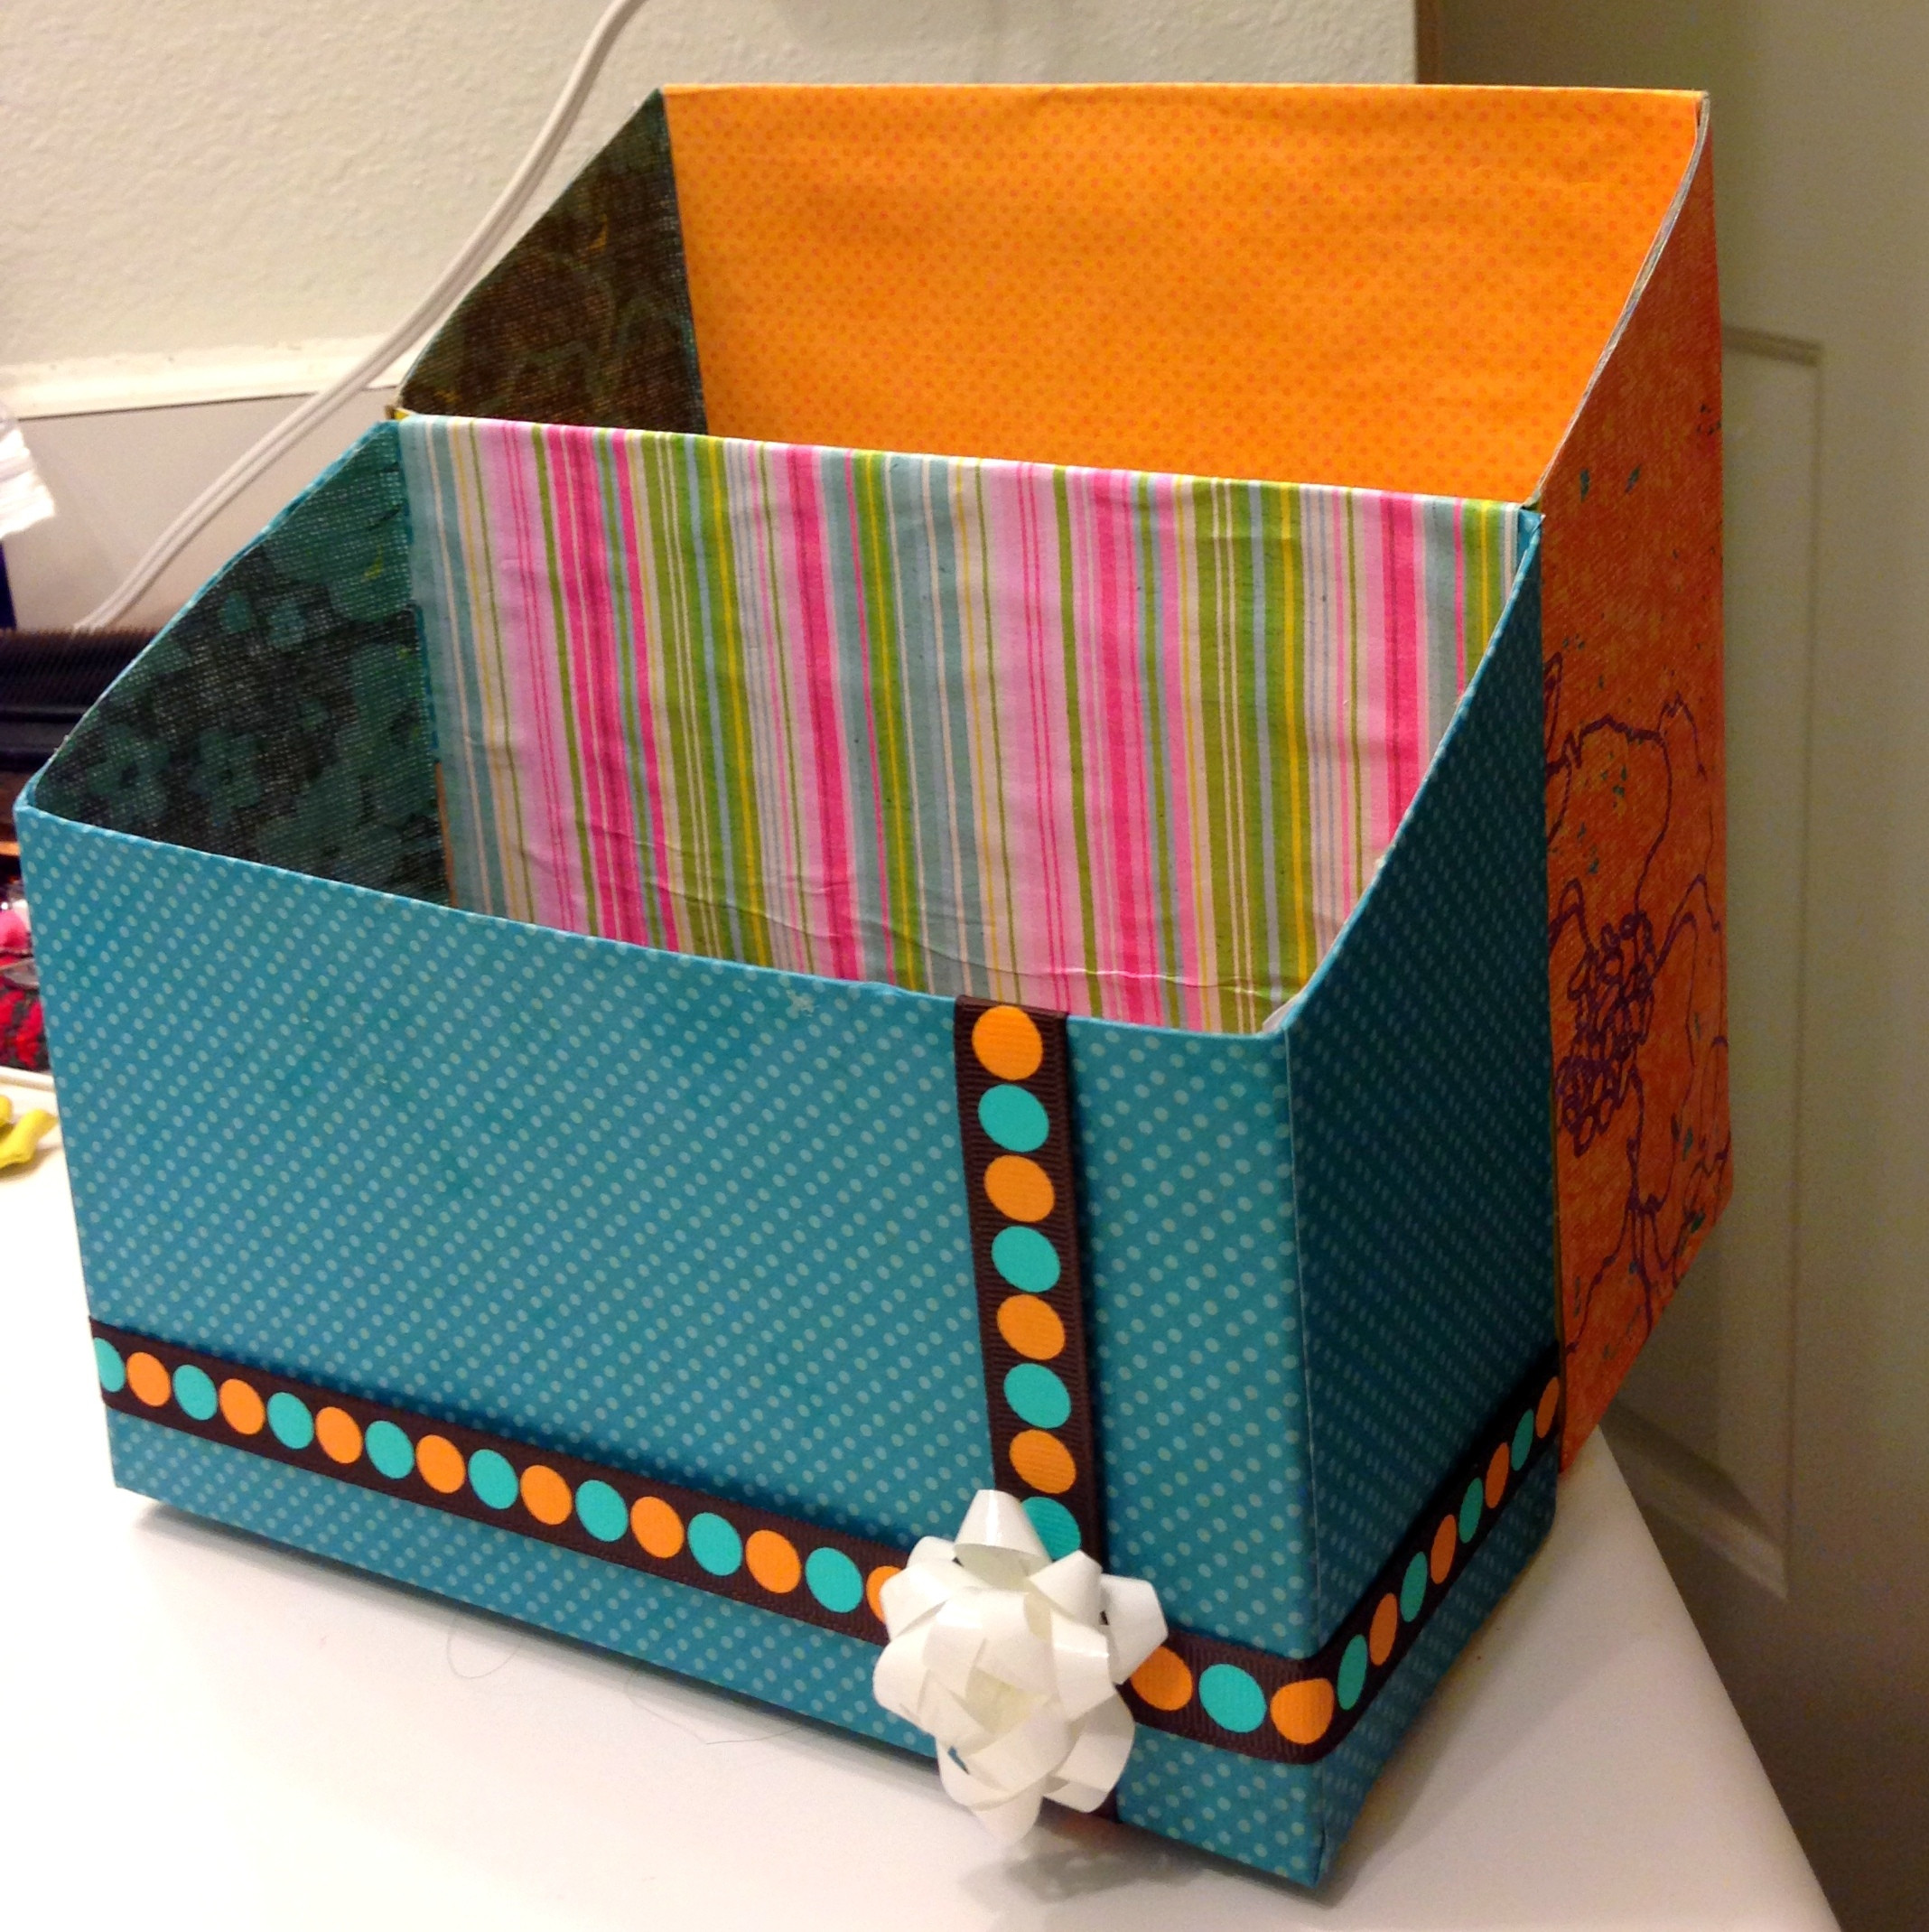 DIY Mail Organizer
 DIY mail organizer from cereal box